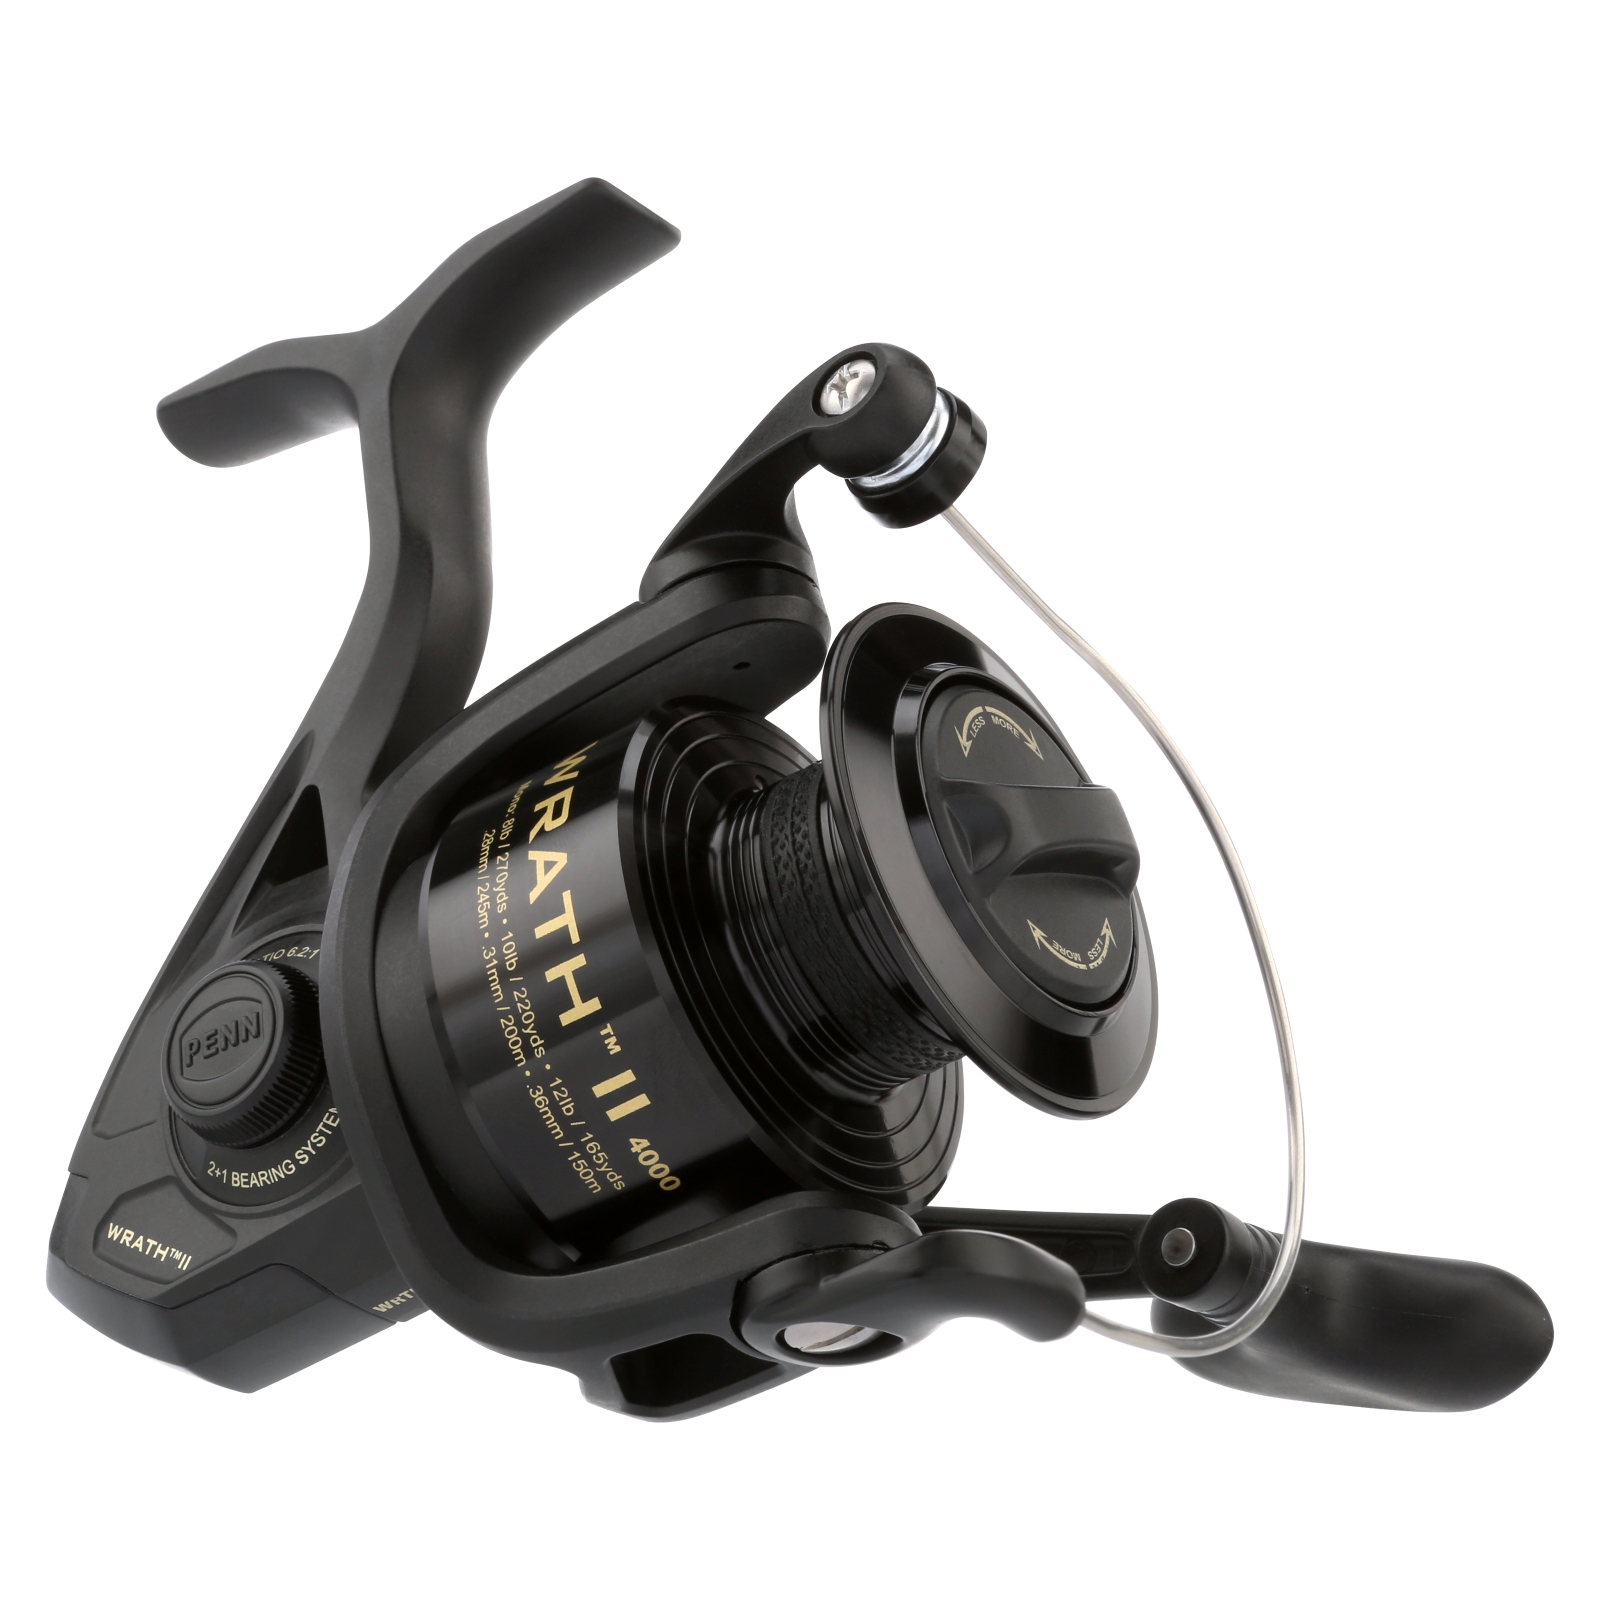 NEW PENN Wrath II Reel and Combo - Affordable Option 